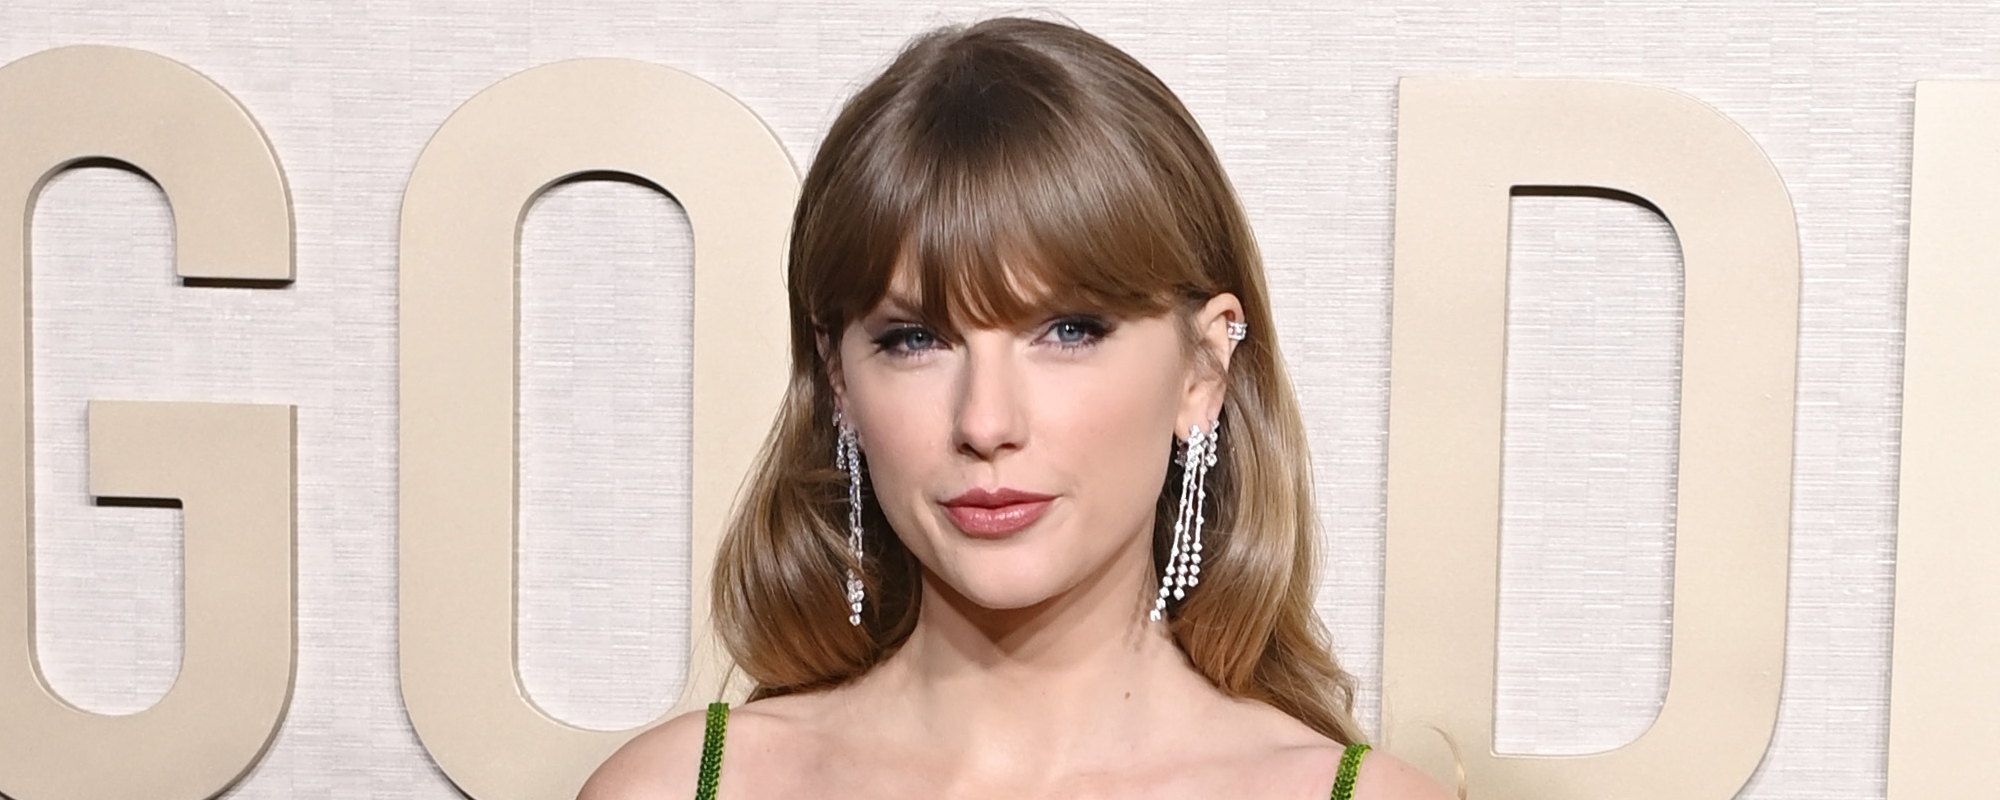 Taylor Swift Faces Backlash From Philippines Lawmaker: “Actions Like That Hurt”